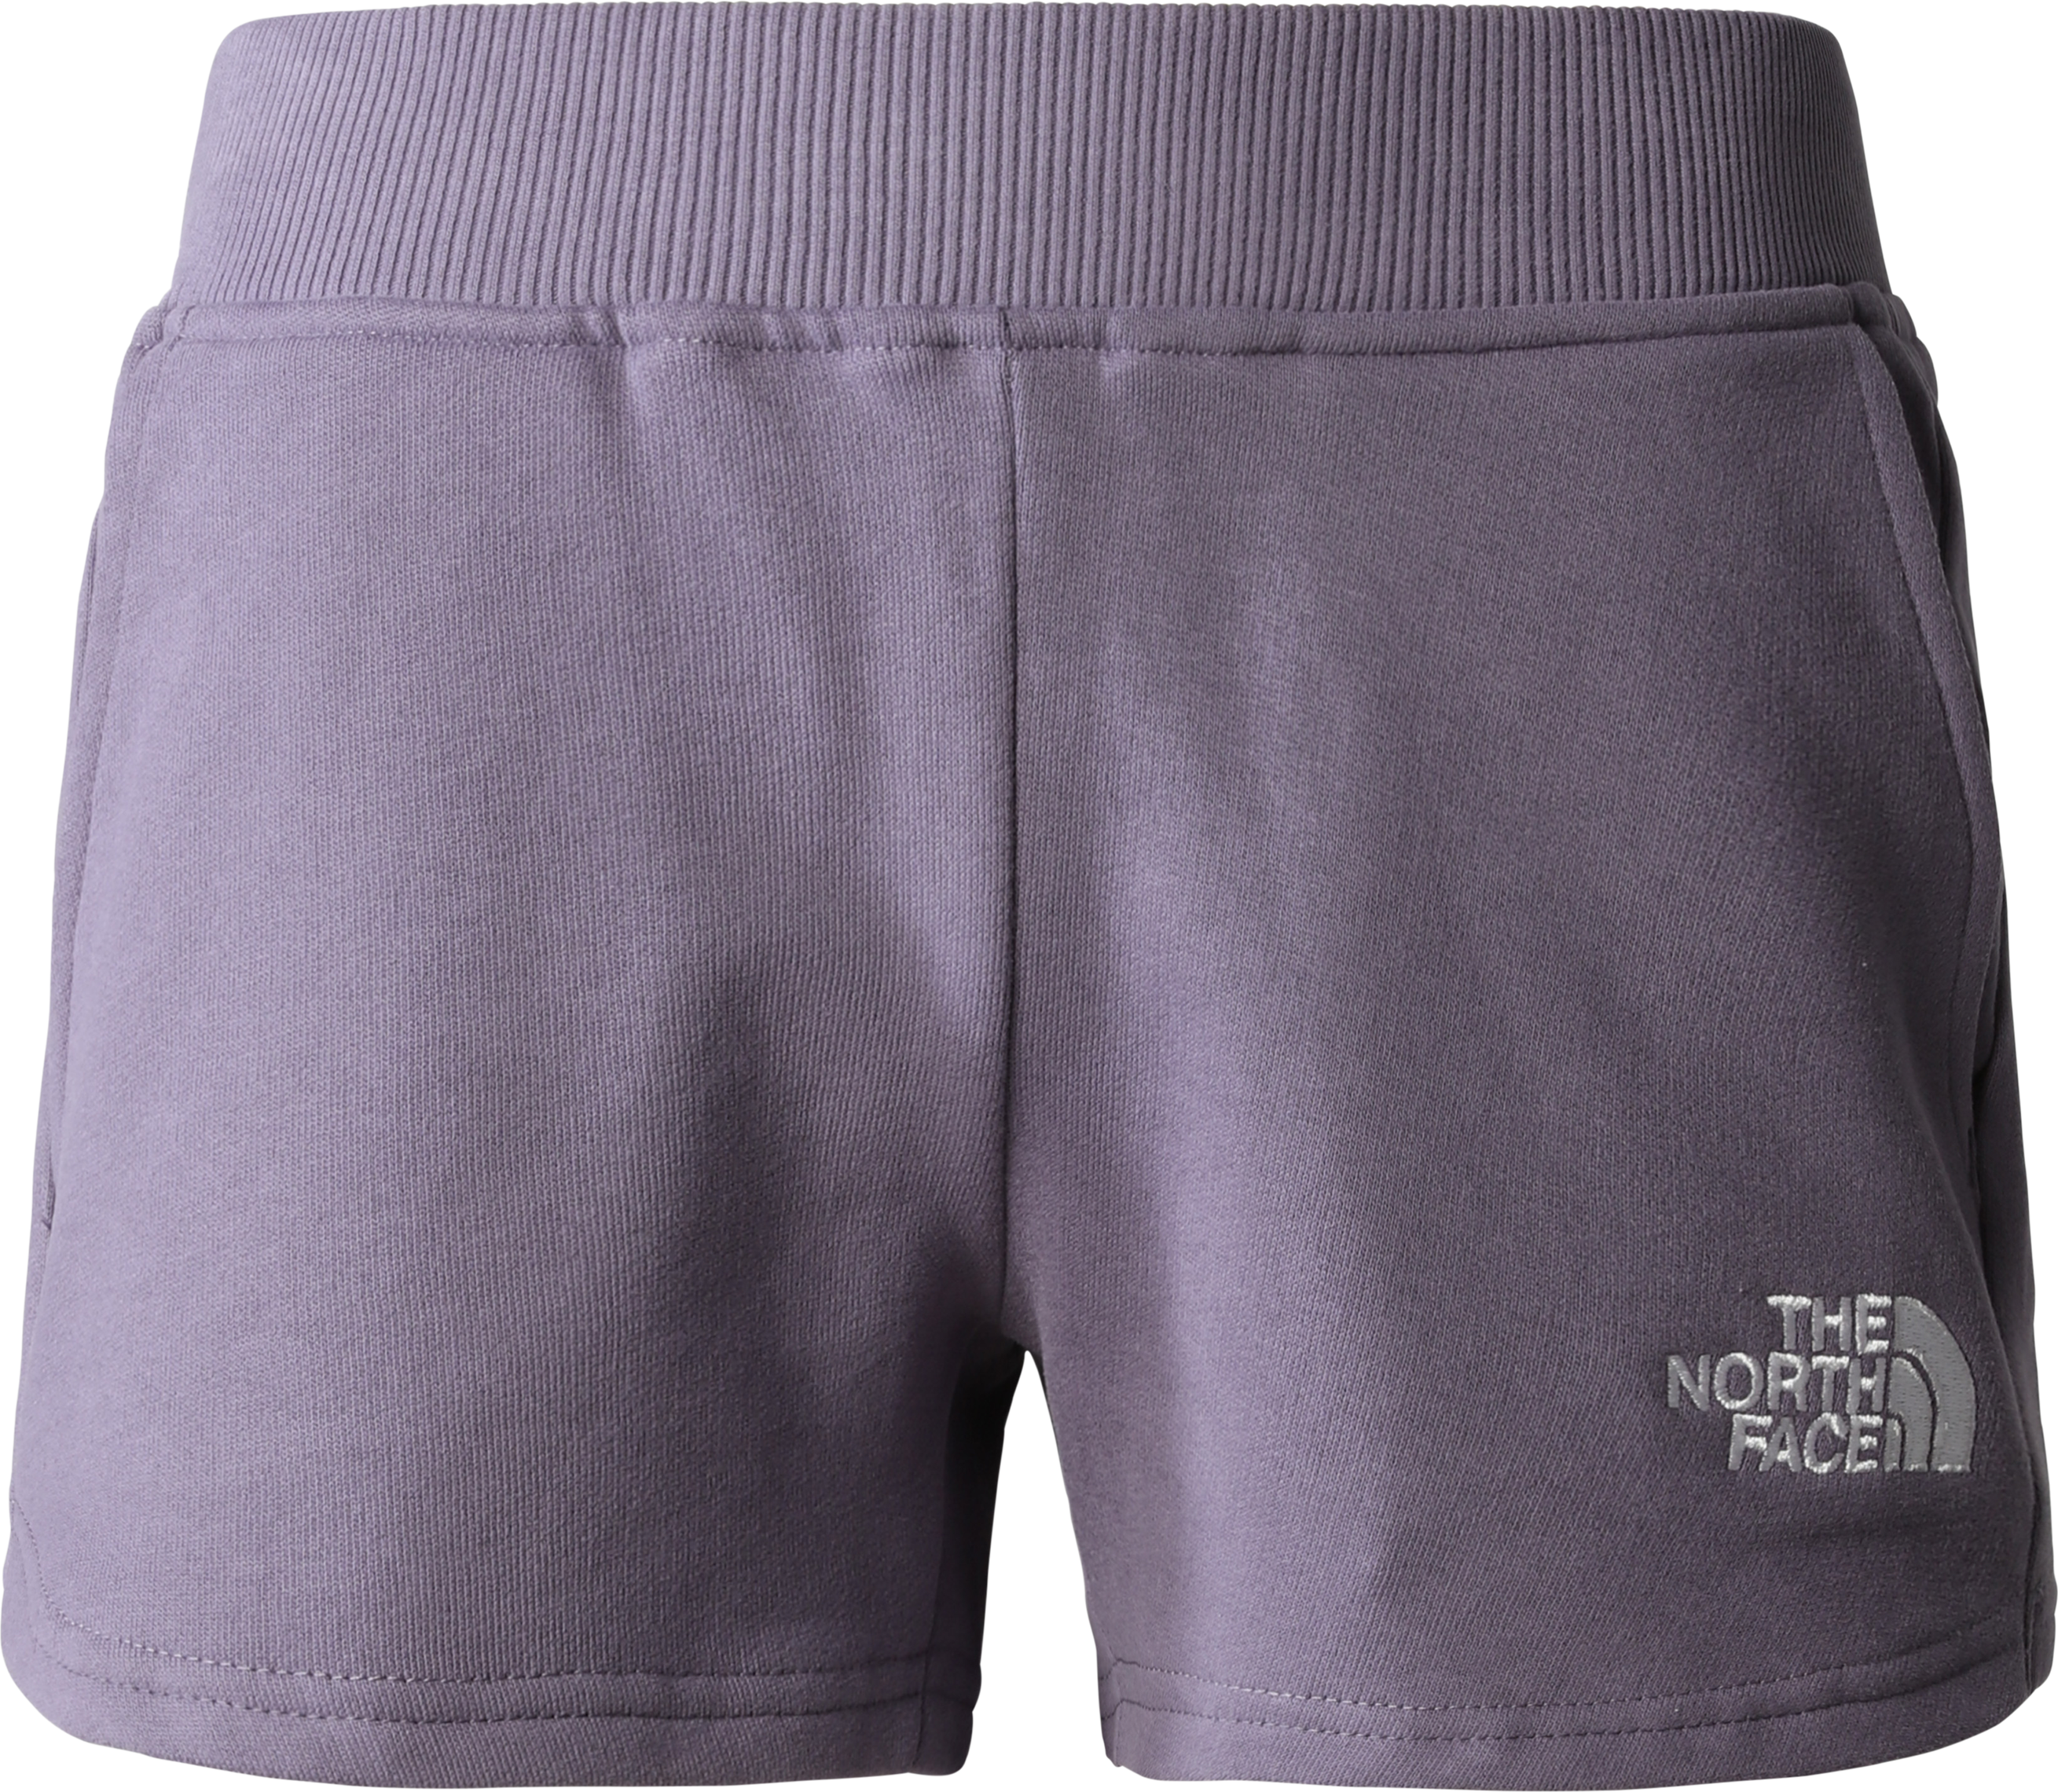 The North Face Girls’ Cotton Shorts LUNAR SLATE